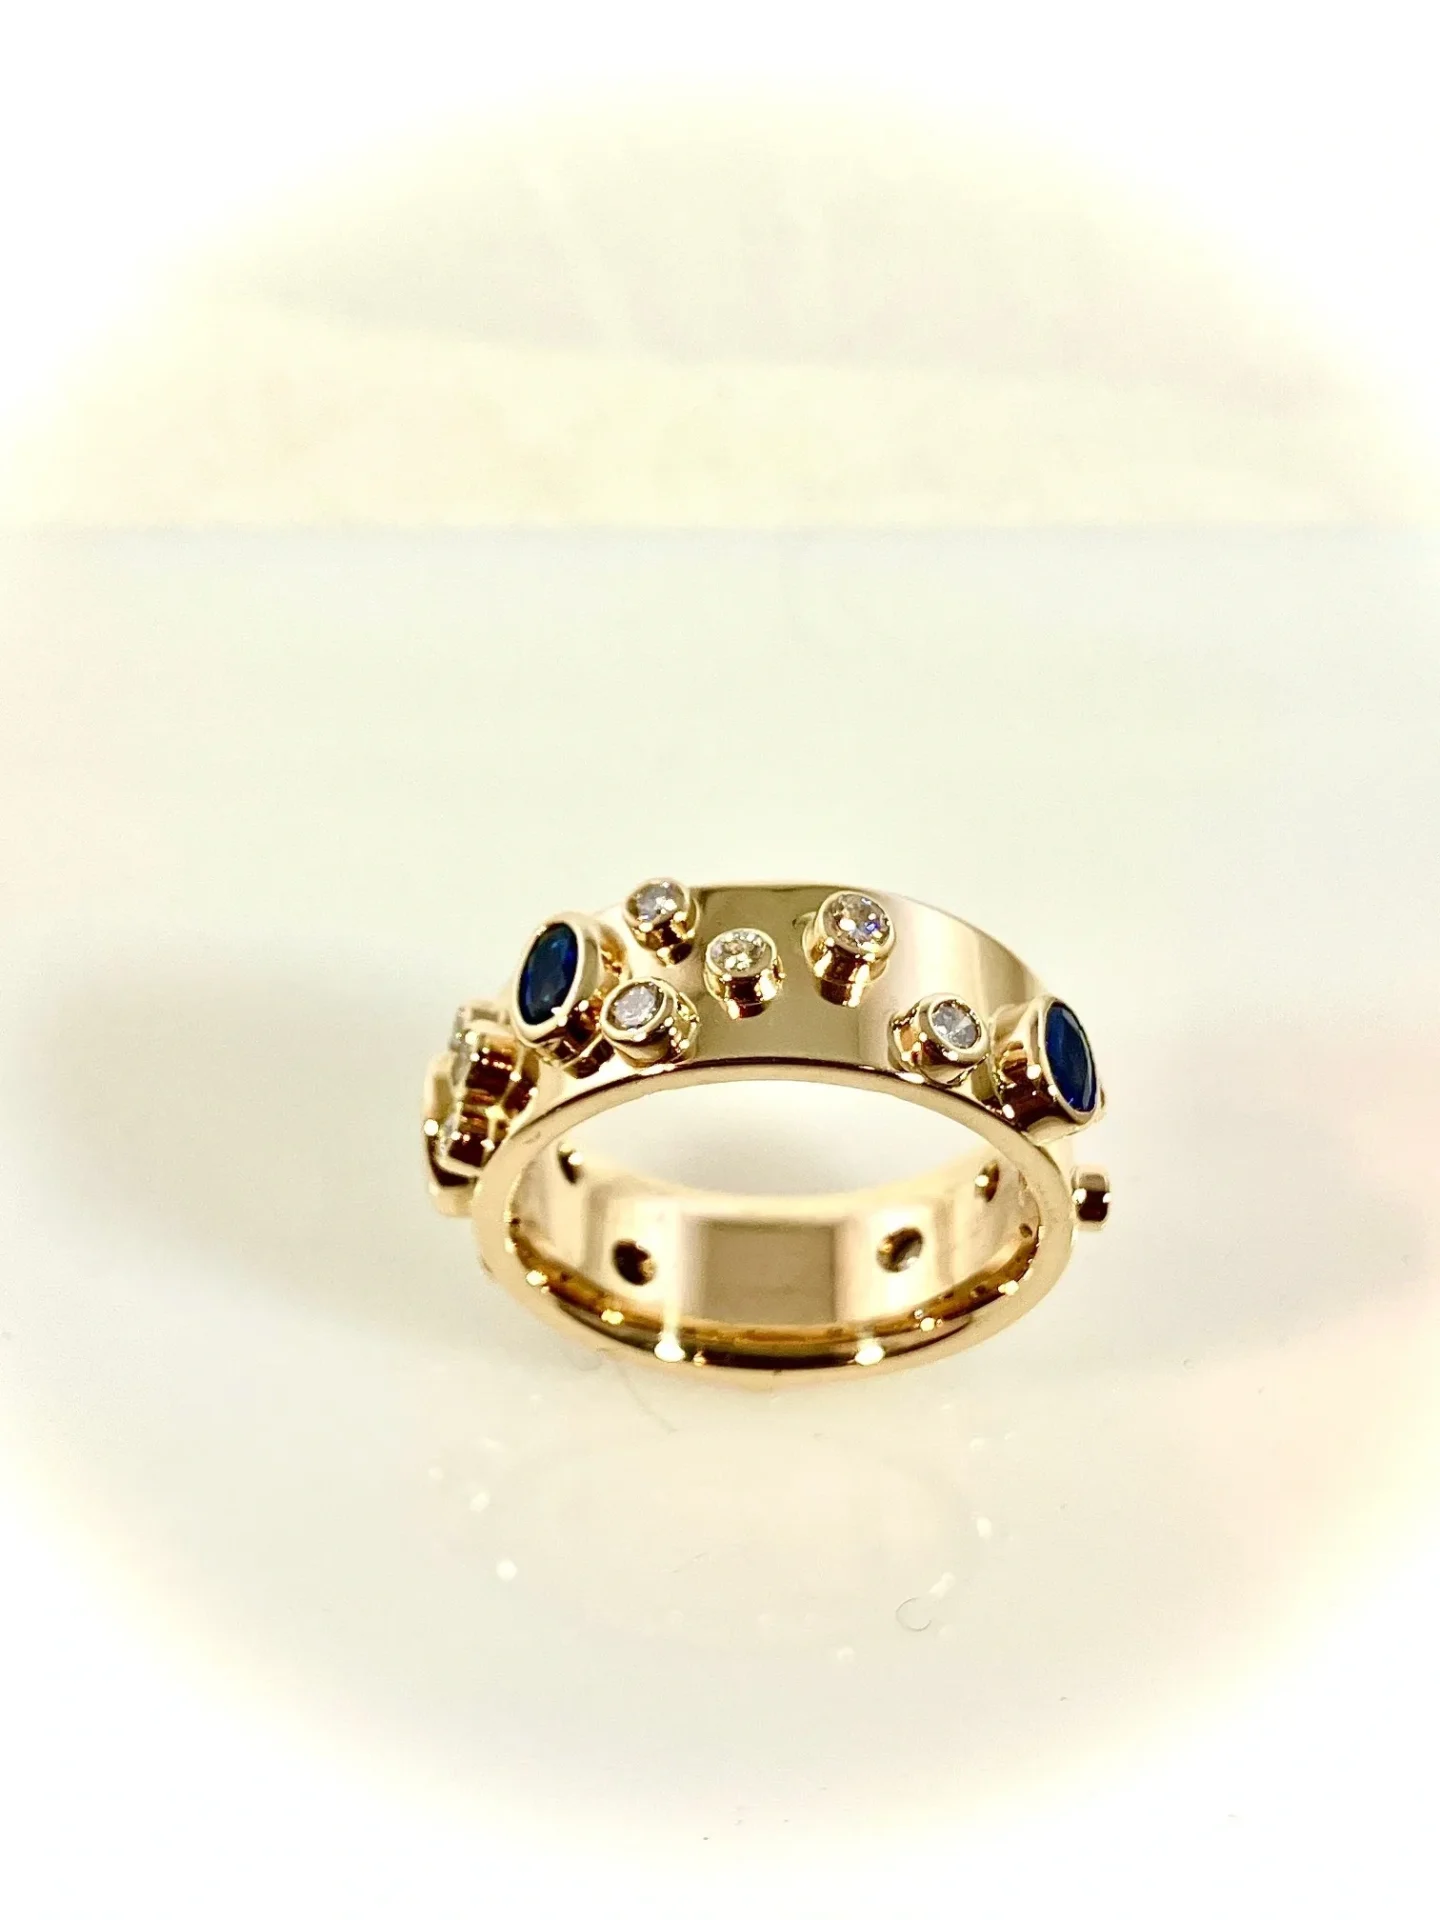 A gold ring with some blue and white stones